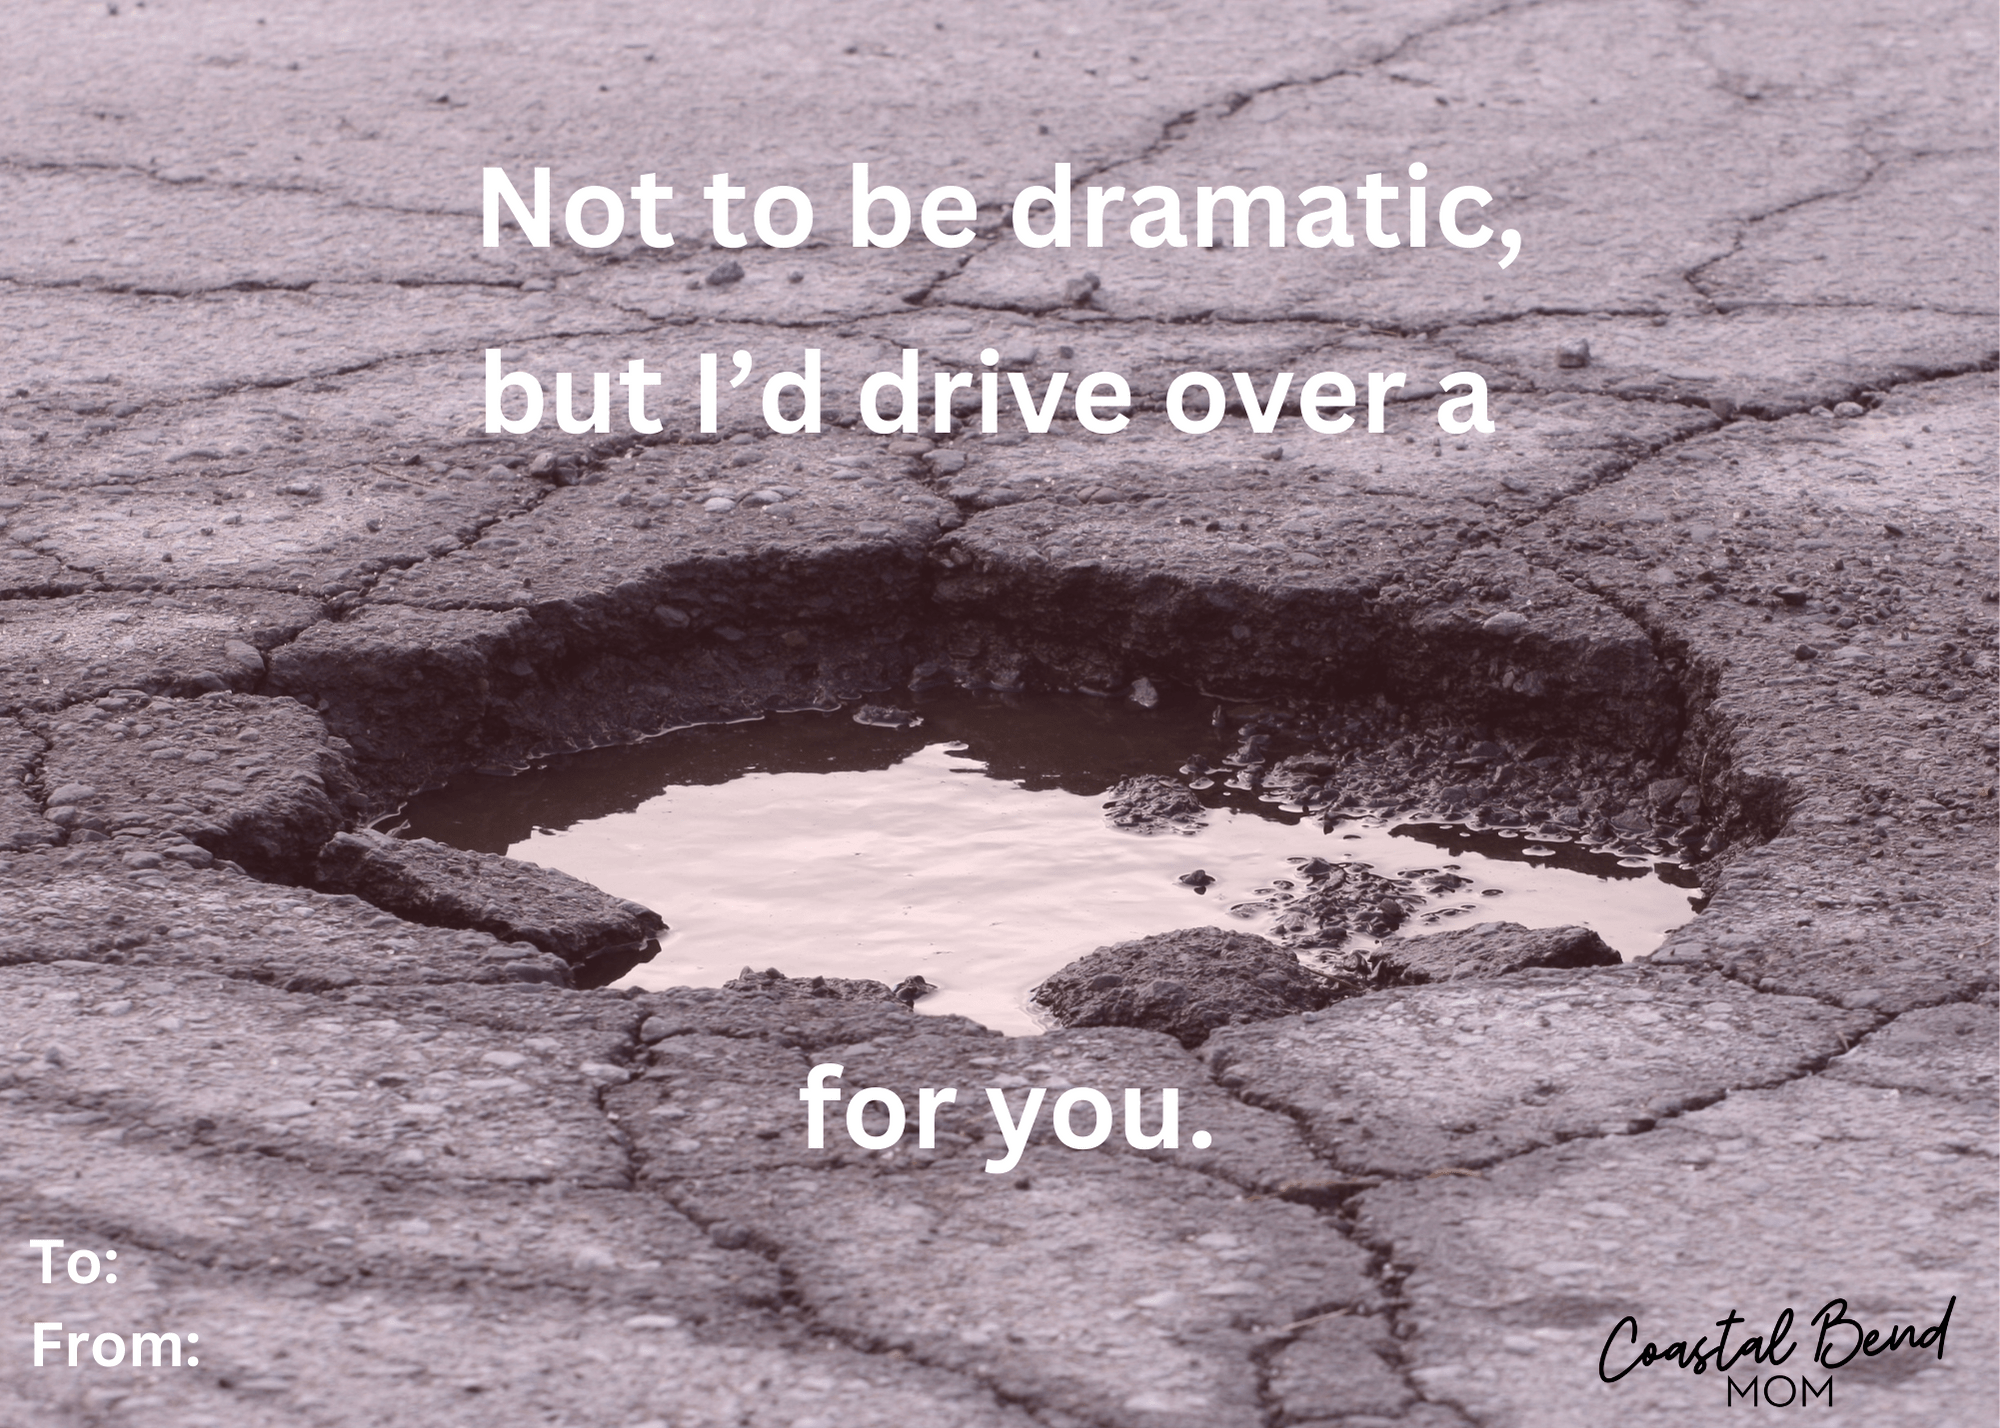 Punny valentine card - image of a large pot hole in the road, filled with water. Card reads "Not to be dramatic, but I'd drive over a pothole for you."